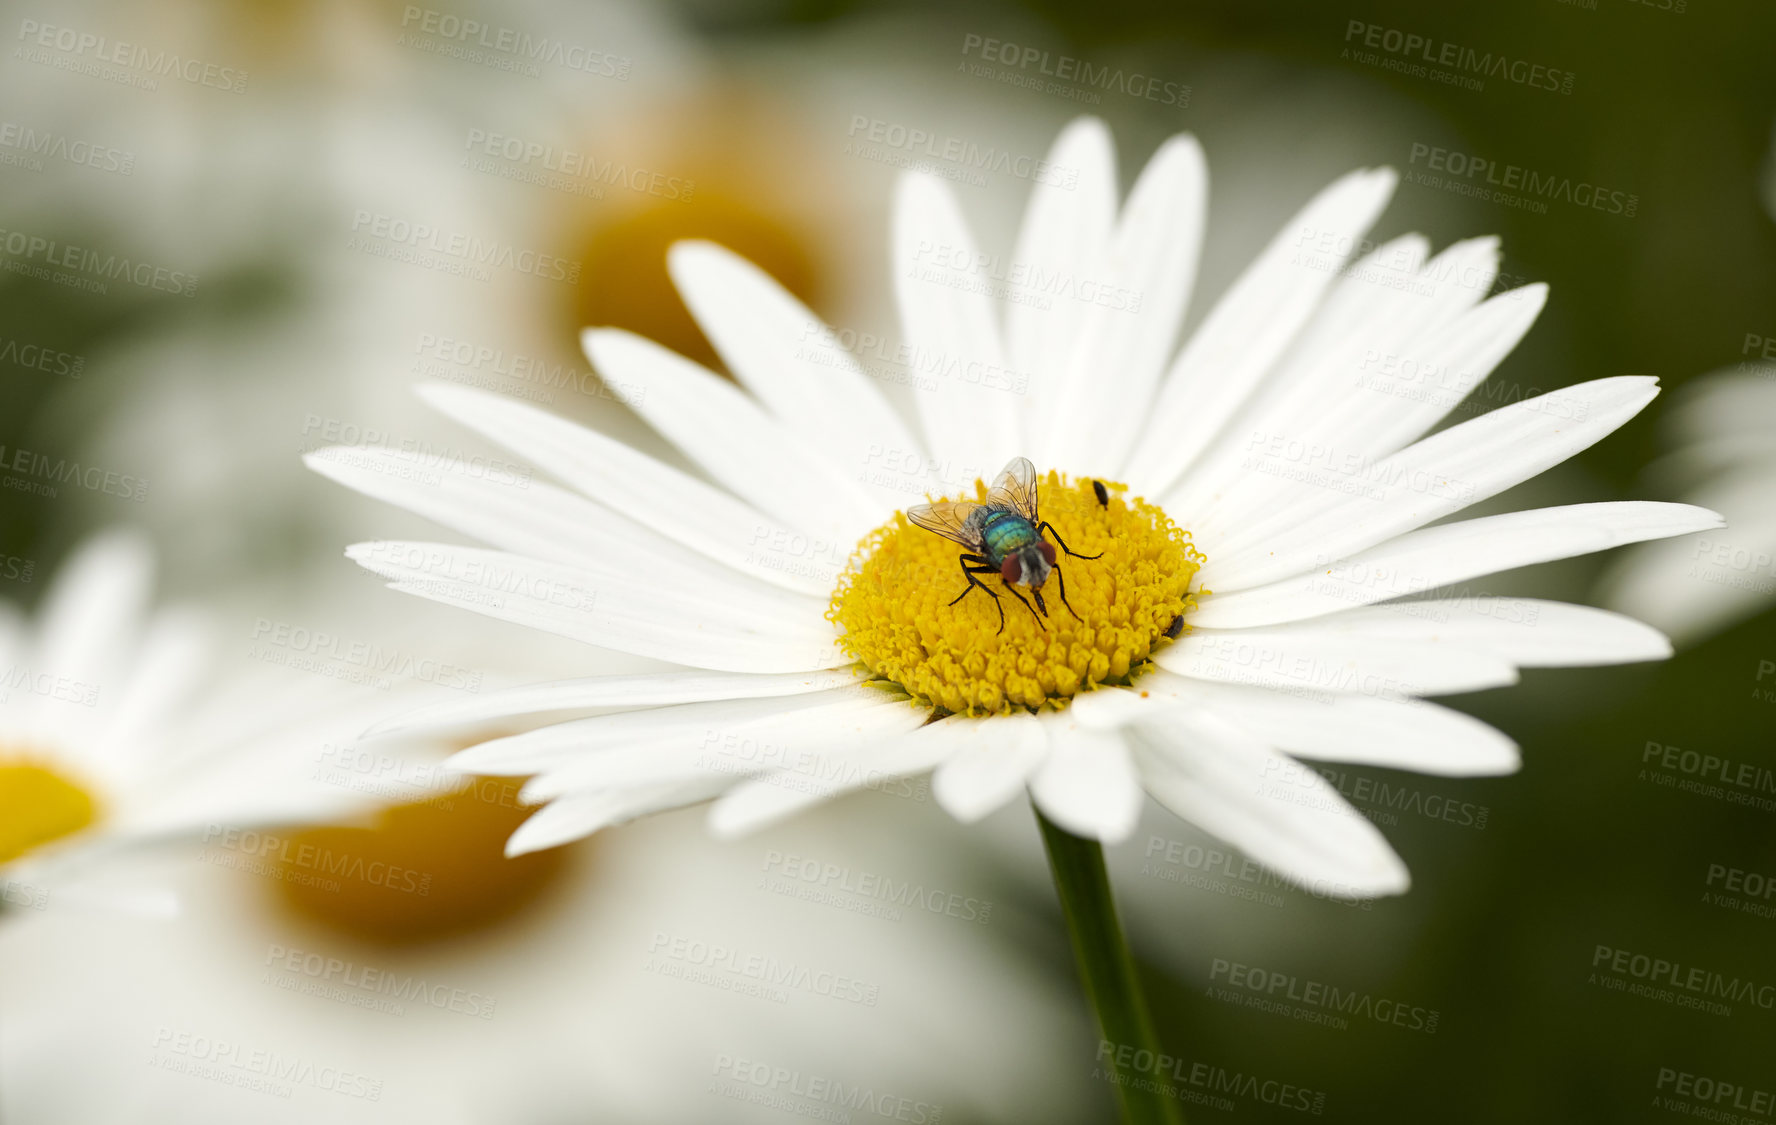 Buy stock photo Common green bottle fly pollinating a white daisy flower. Closeup of one blowfly feeding off nectar from a yellow pistil center on a plant. Macro of a lucilia sericata insect and bug in an ecosystem